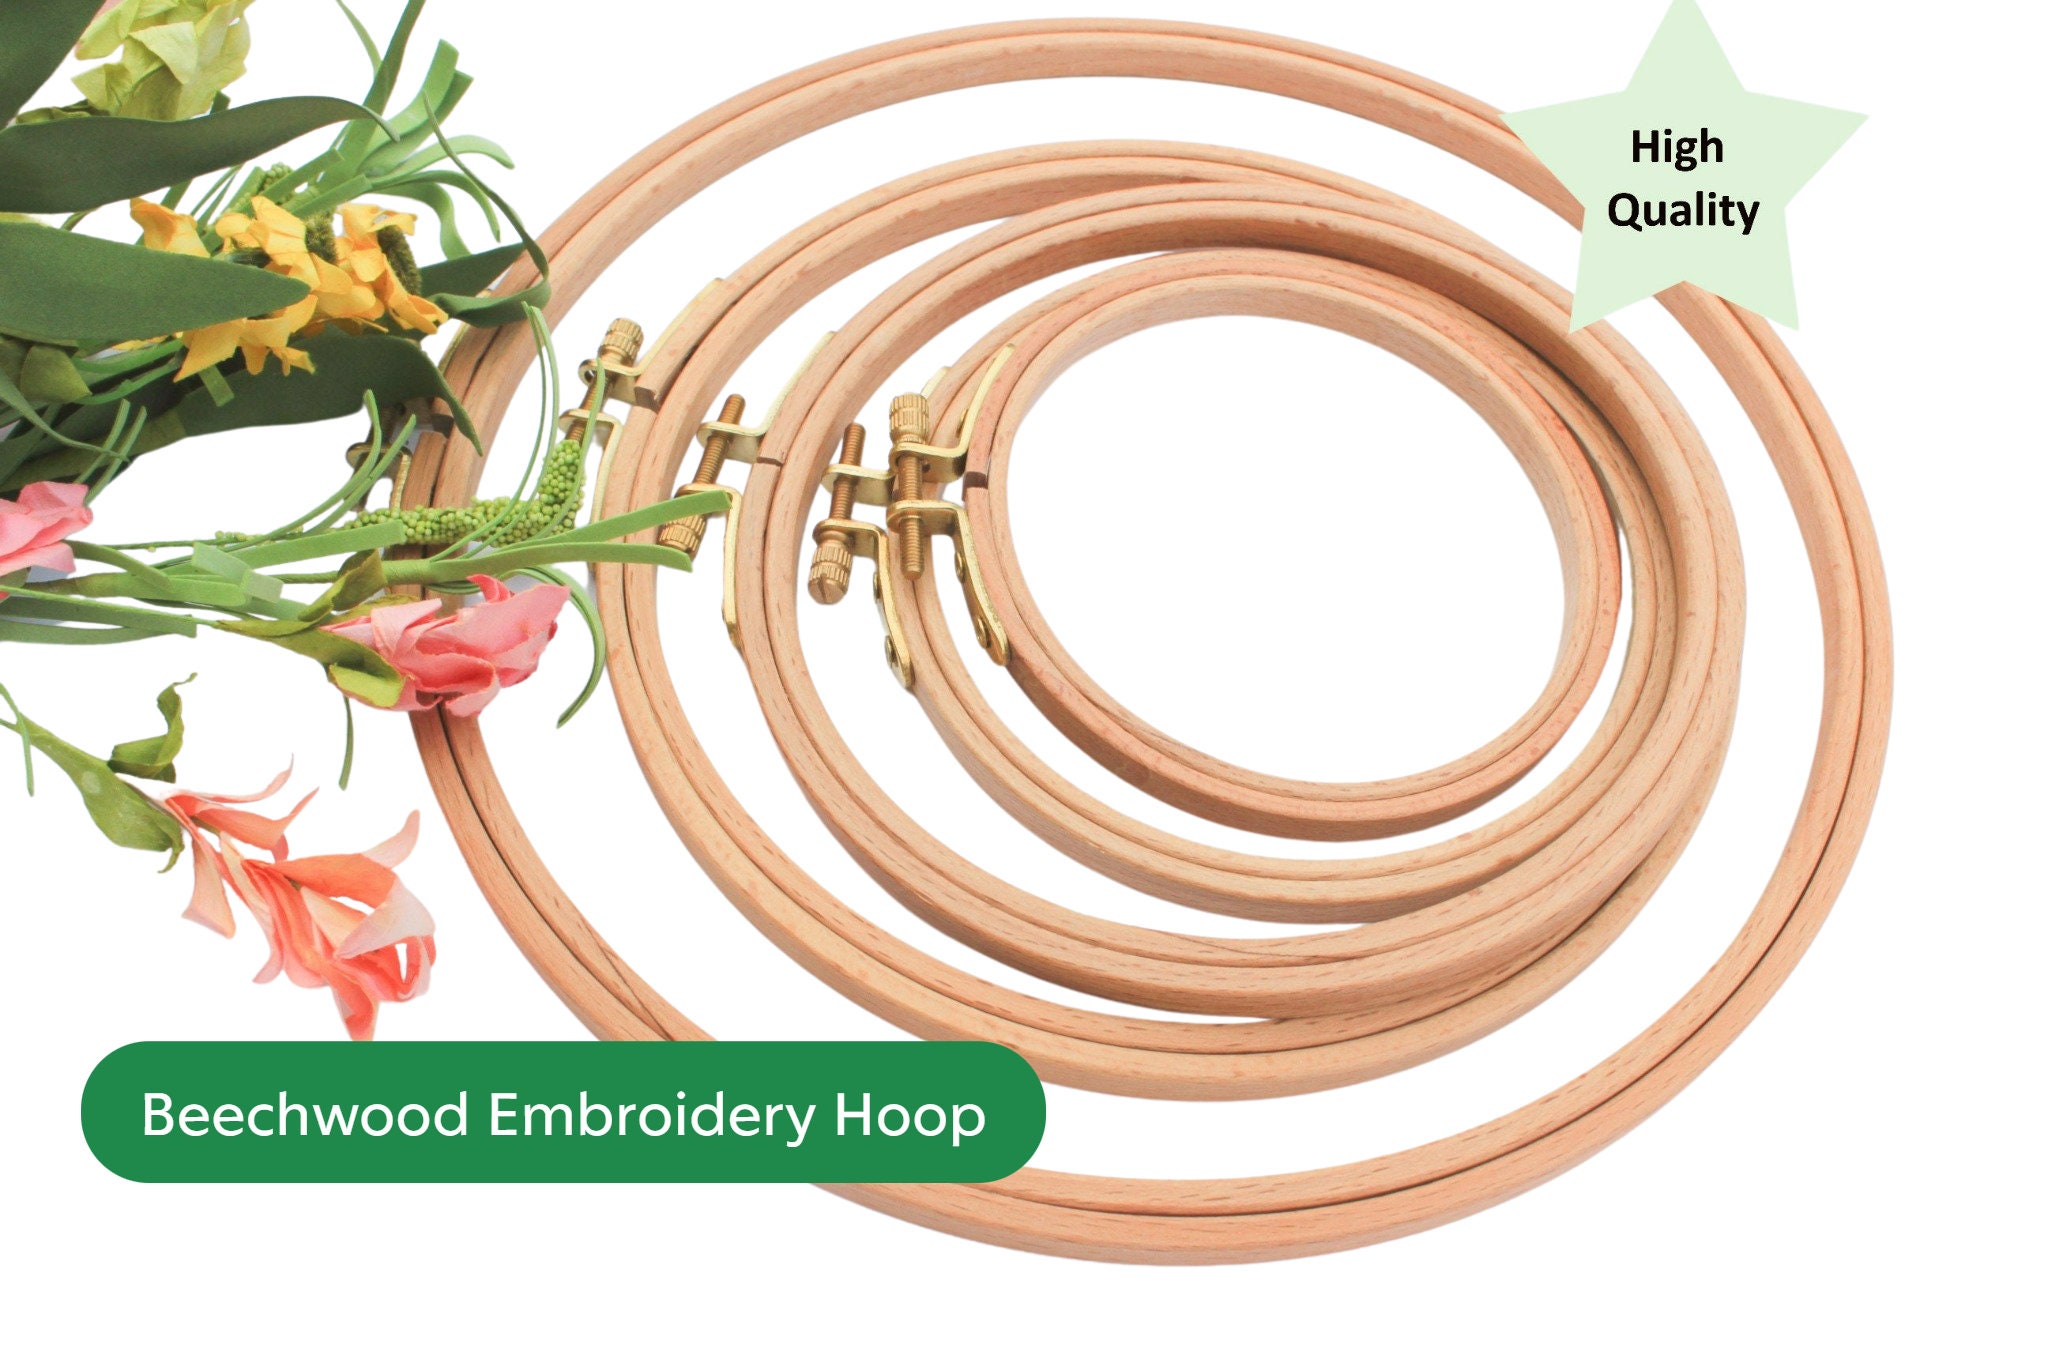 F.A. Edmunds Beechwood Embroidery Hoop - 7 inch 202-7 - 123Stitch